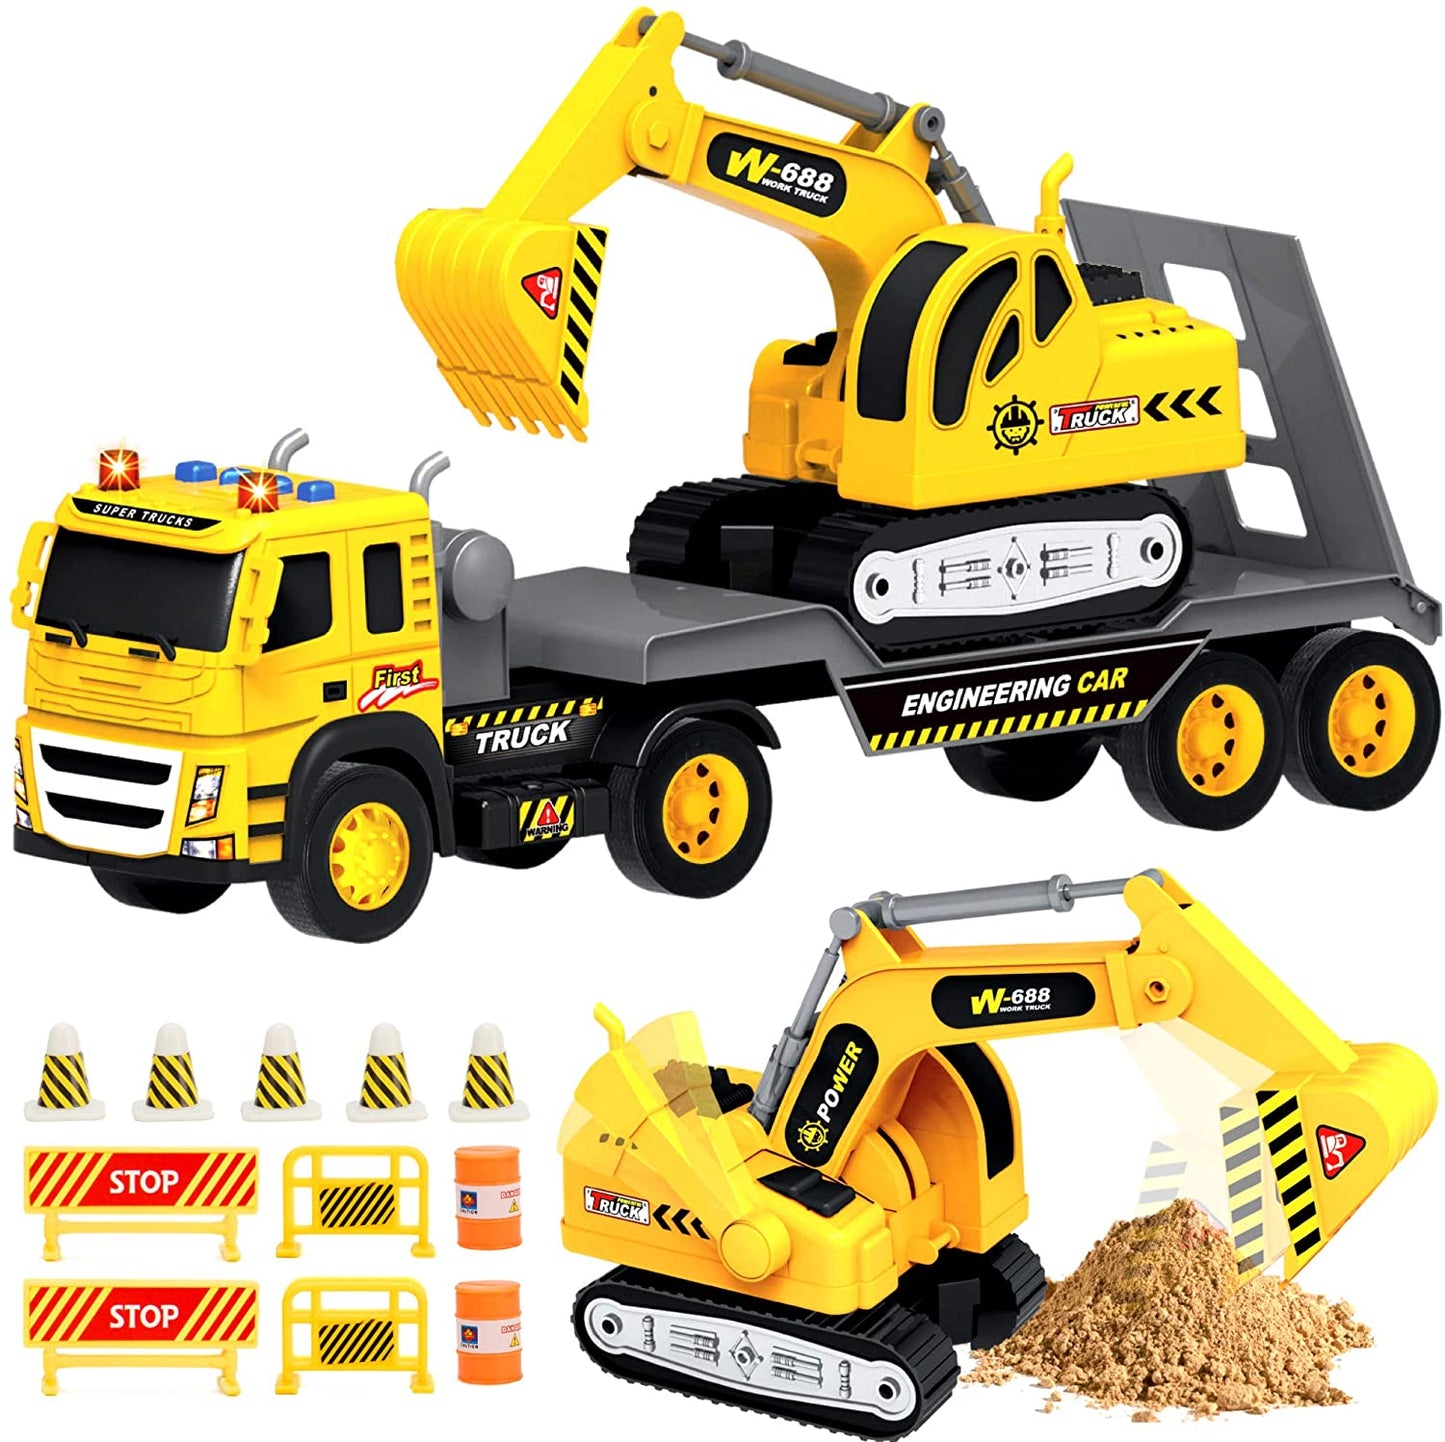 1:12 Scale Flatbed Truck with Excavator Tractor | 2 Trucks with Accessories Toy Set